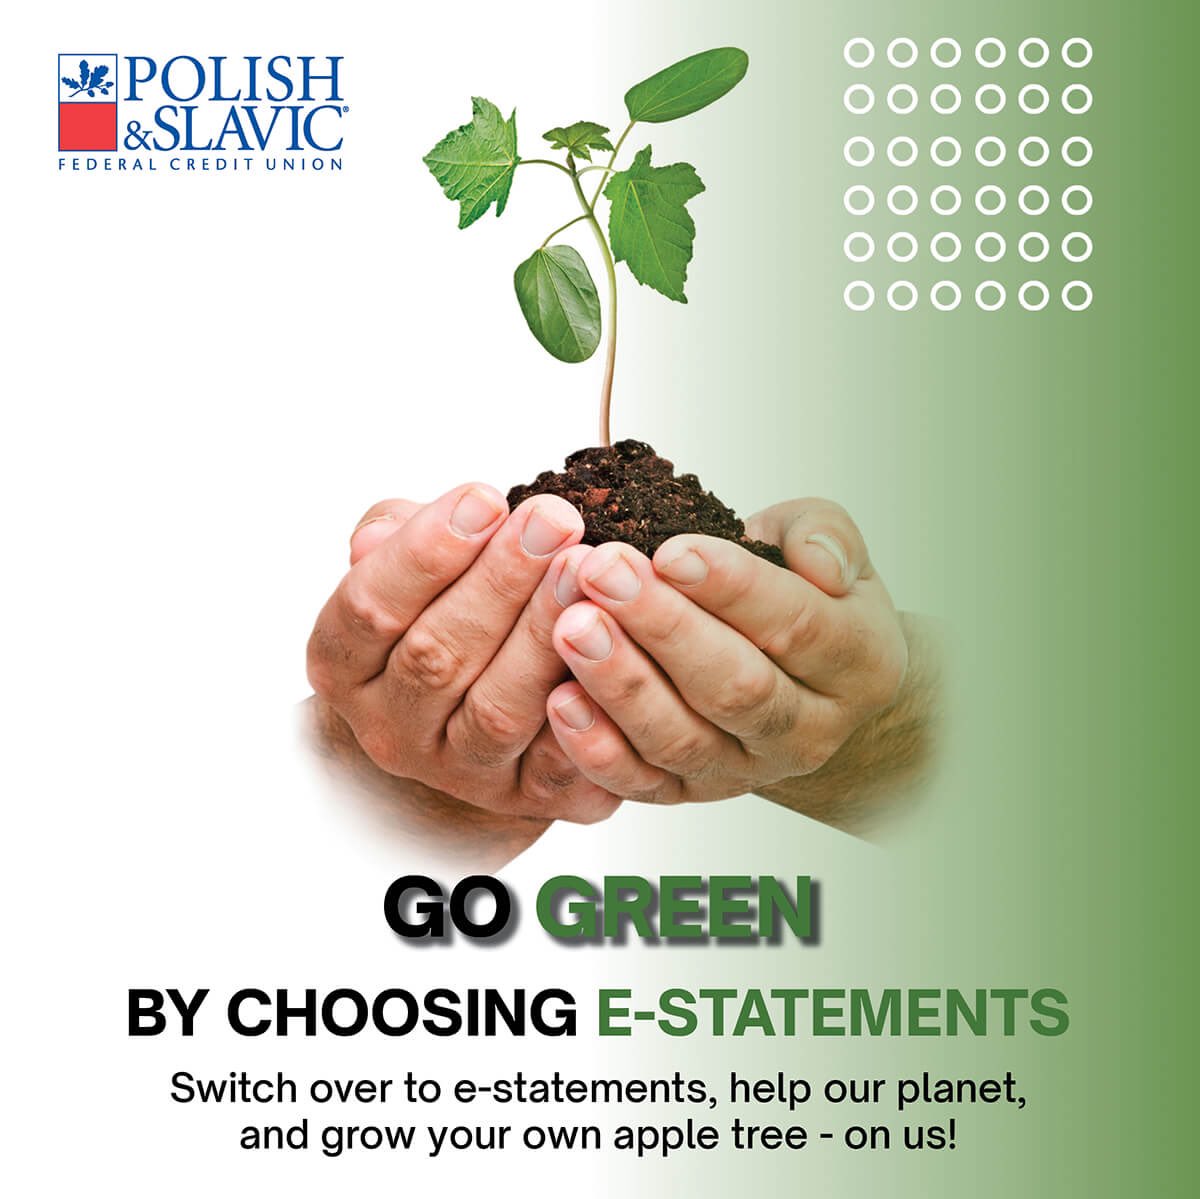 Three easy steps to GO GREEN with us!
1️⃣Switch to eStatements Online
2️⃣Pick-up a tree from PSFCU Branch
3️⃣Plant the 🍎🌳
More info. 👉🏼 en.psfcu.com/current-promot…

#PSFCUPromotion #GoGreen  #apple #tree